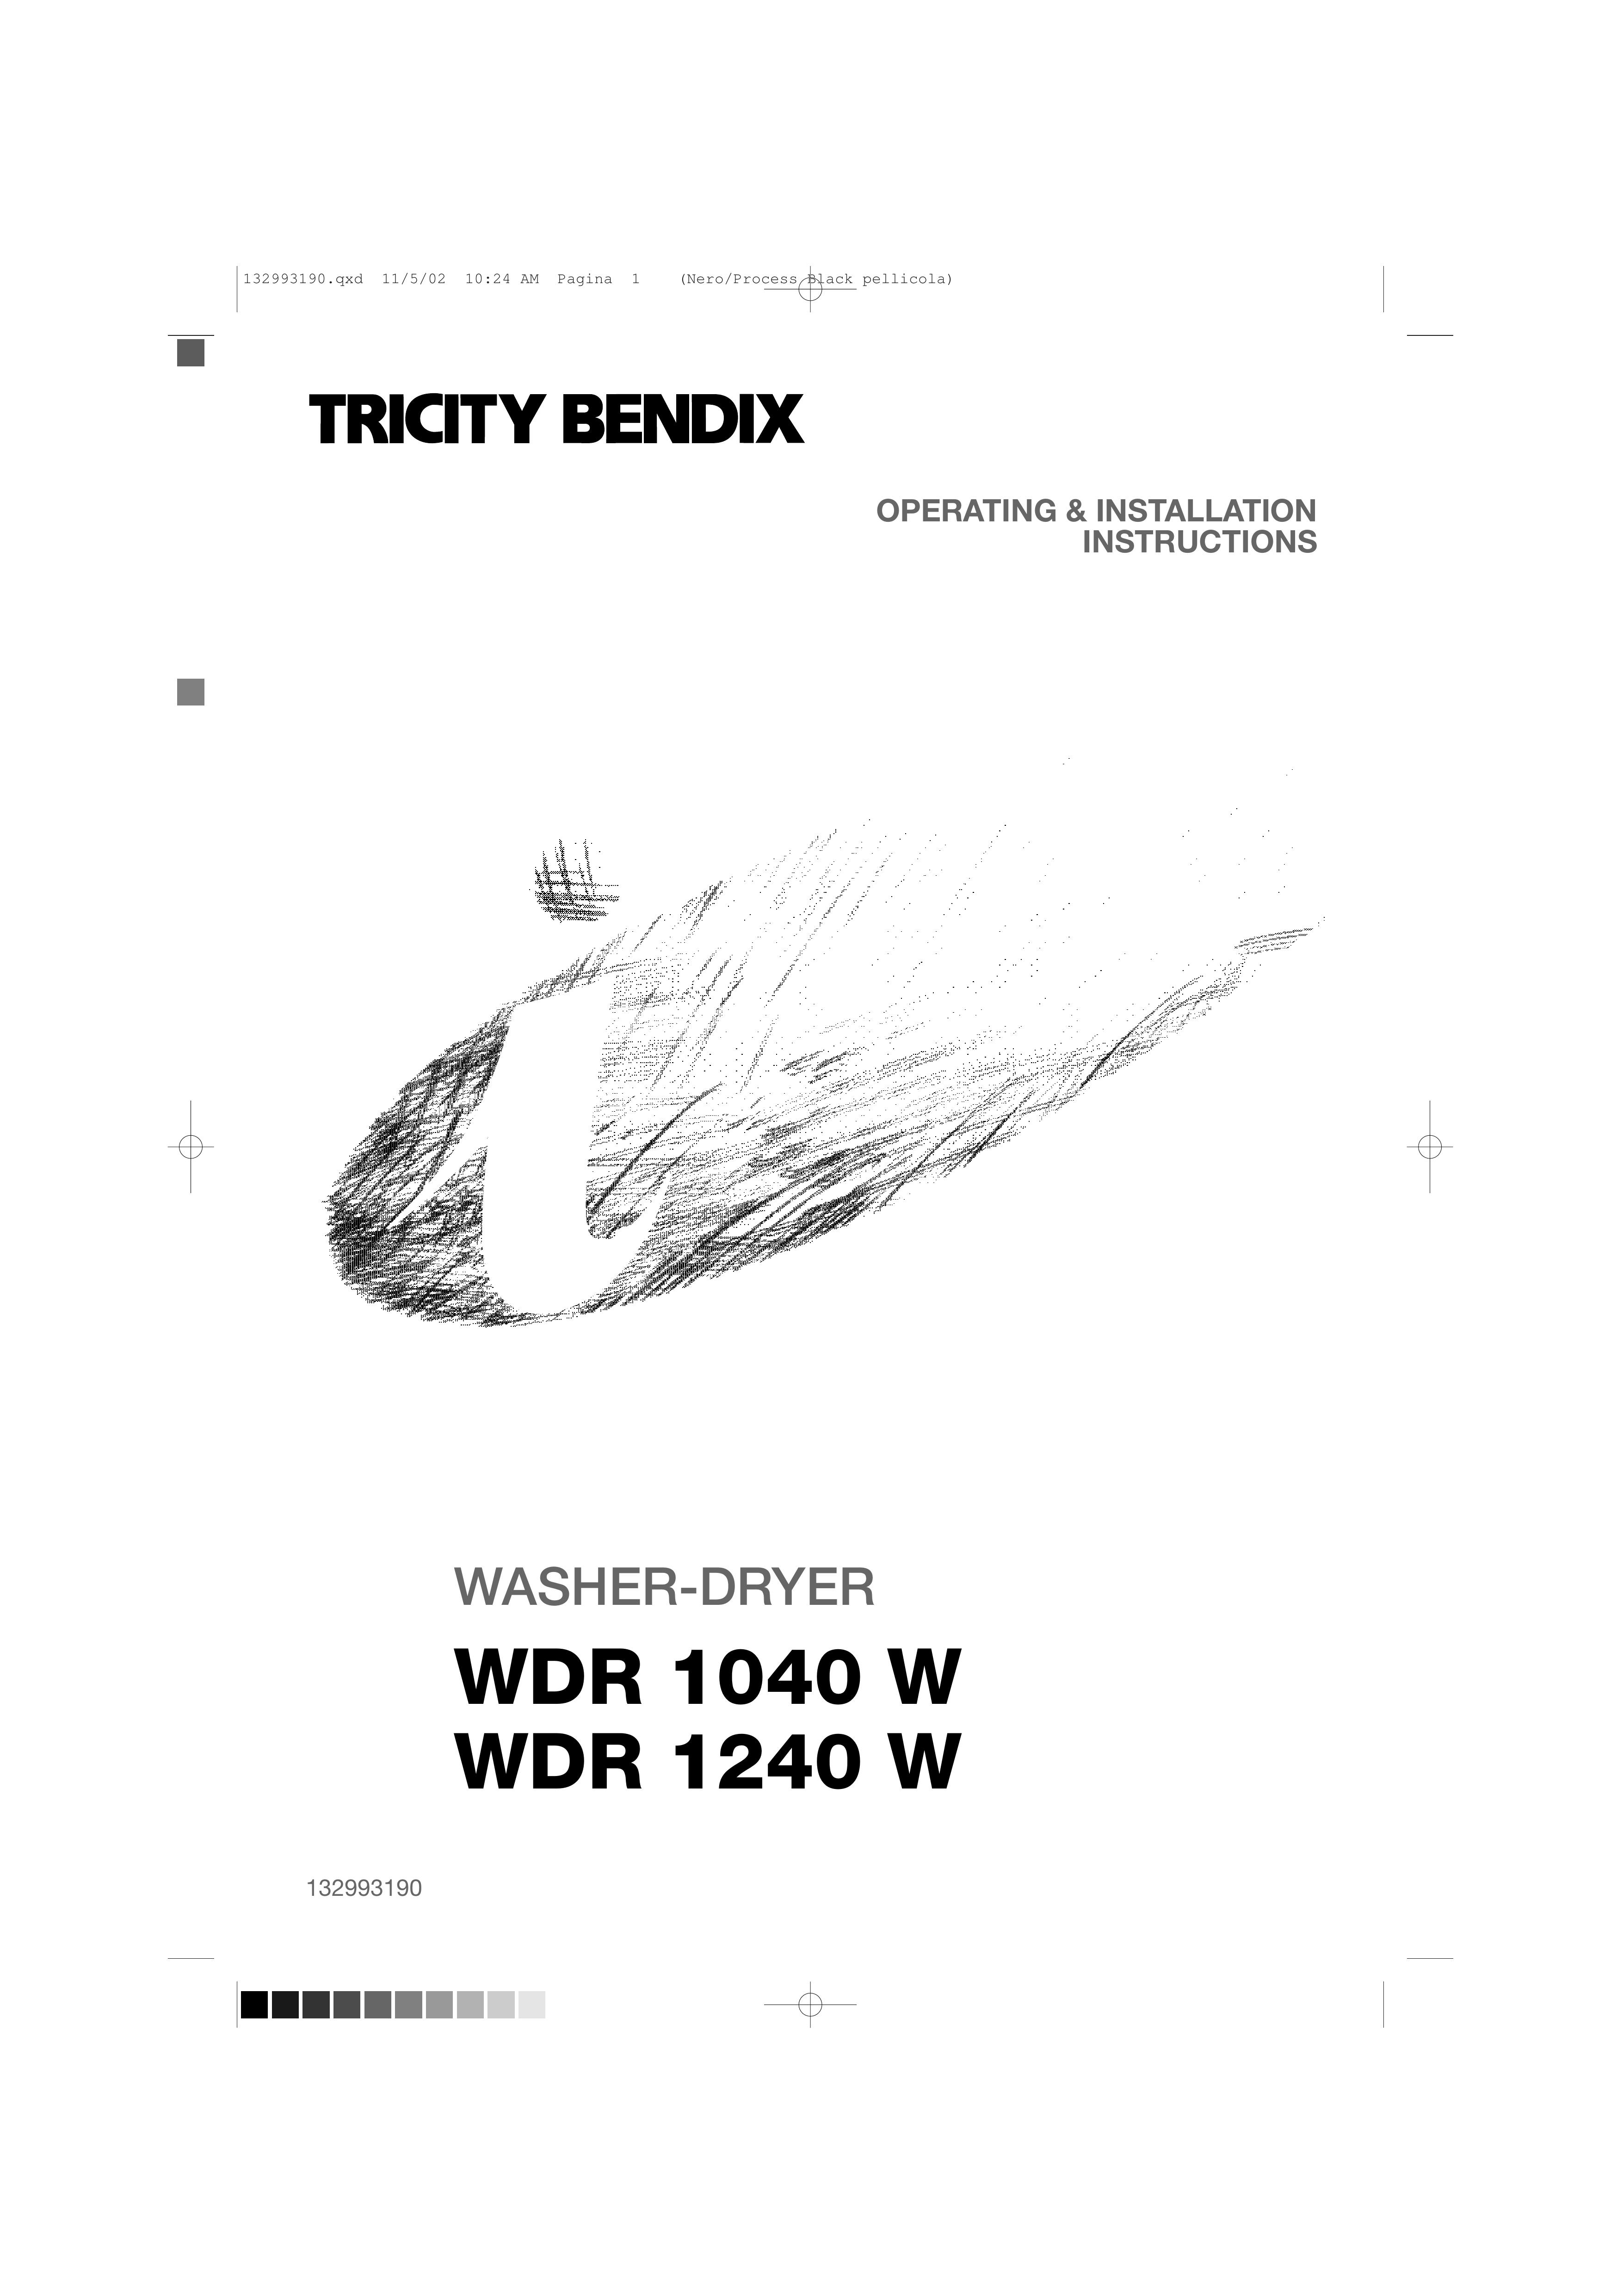 Tricity Bendix WDR 1240 W Washer/Dryer User Manual